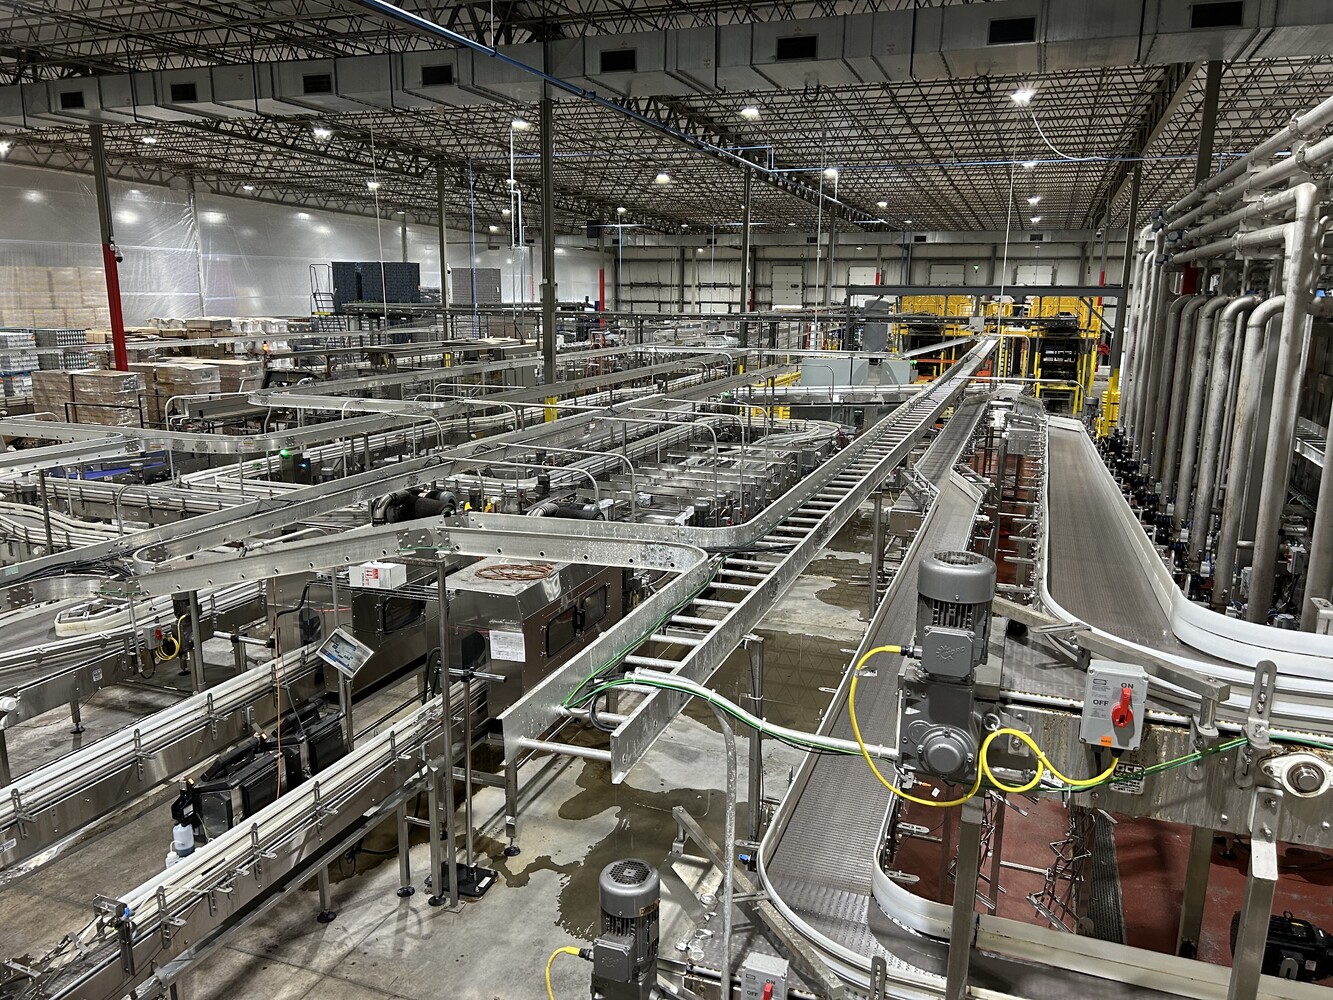 Inside the Lion Brewery facility